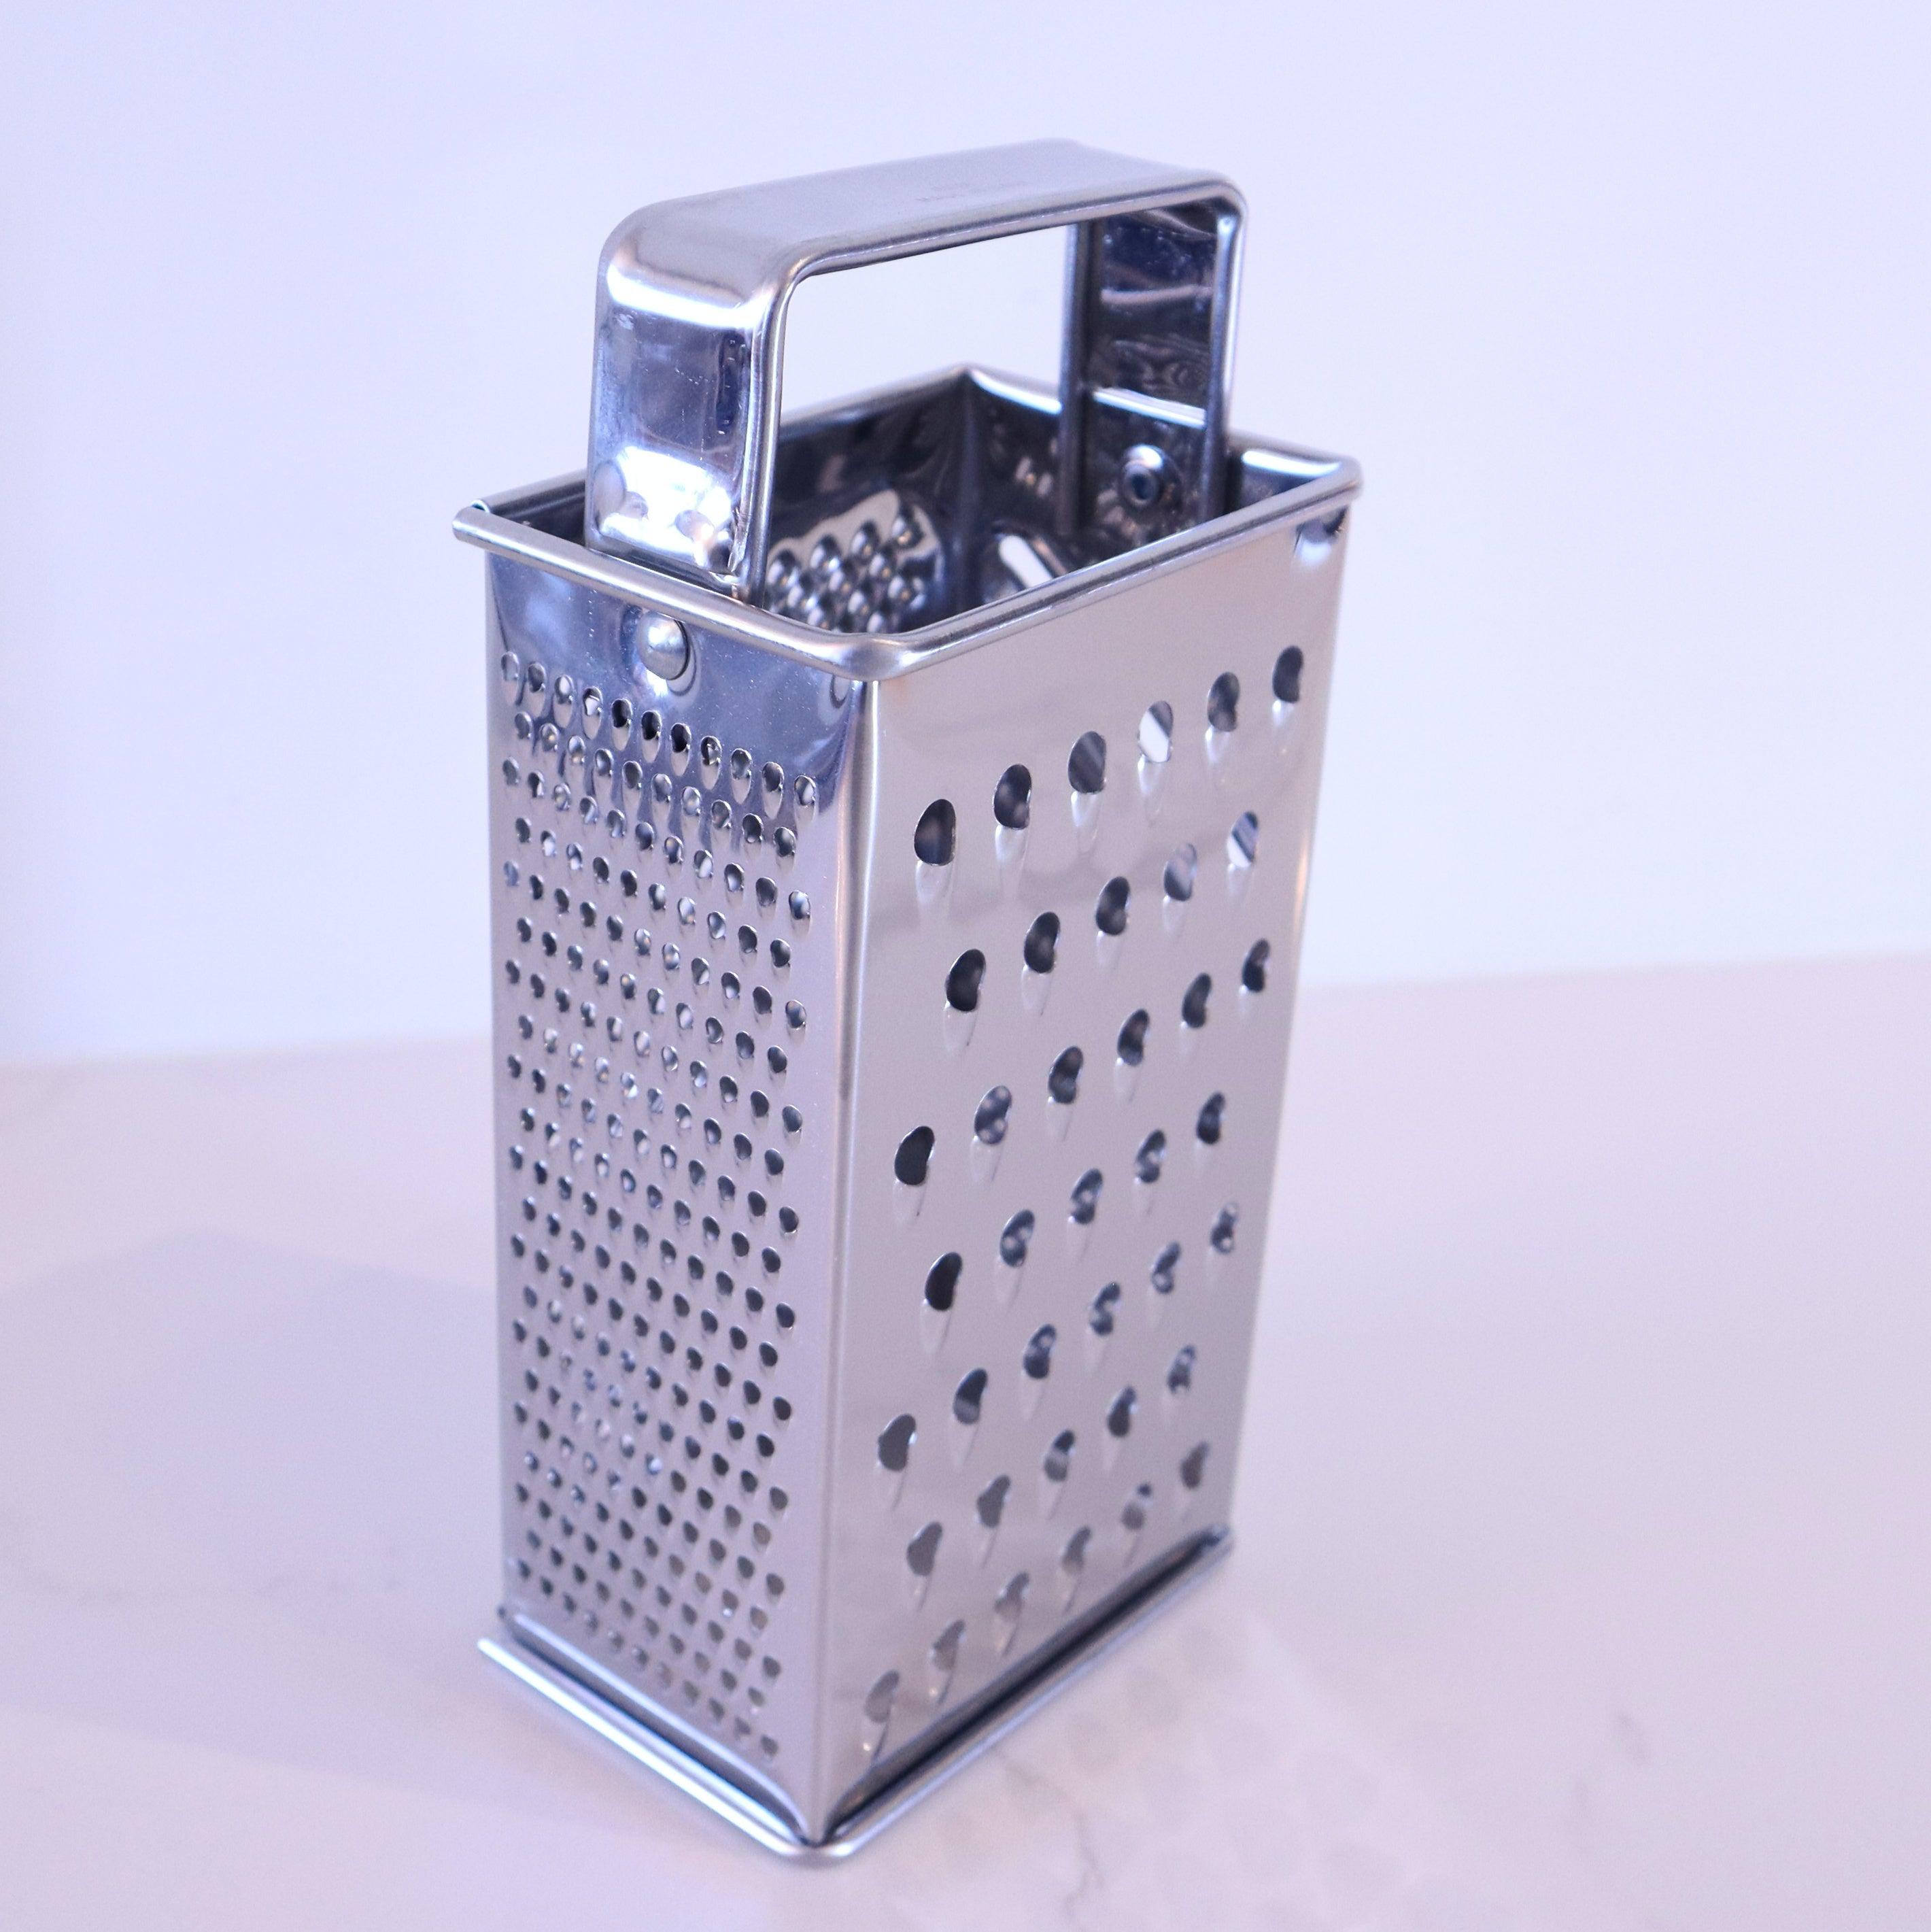 Eppicotispai Stainless Steel Box Cheese Grater 18 cm Side View Large Holes USA